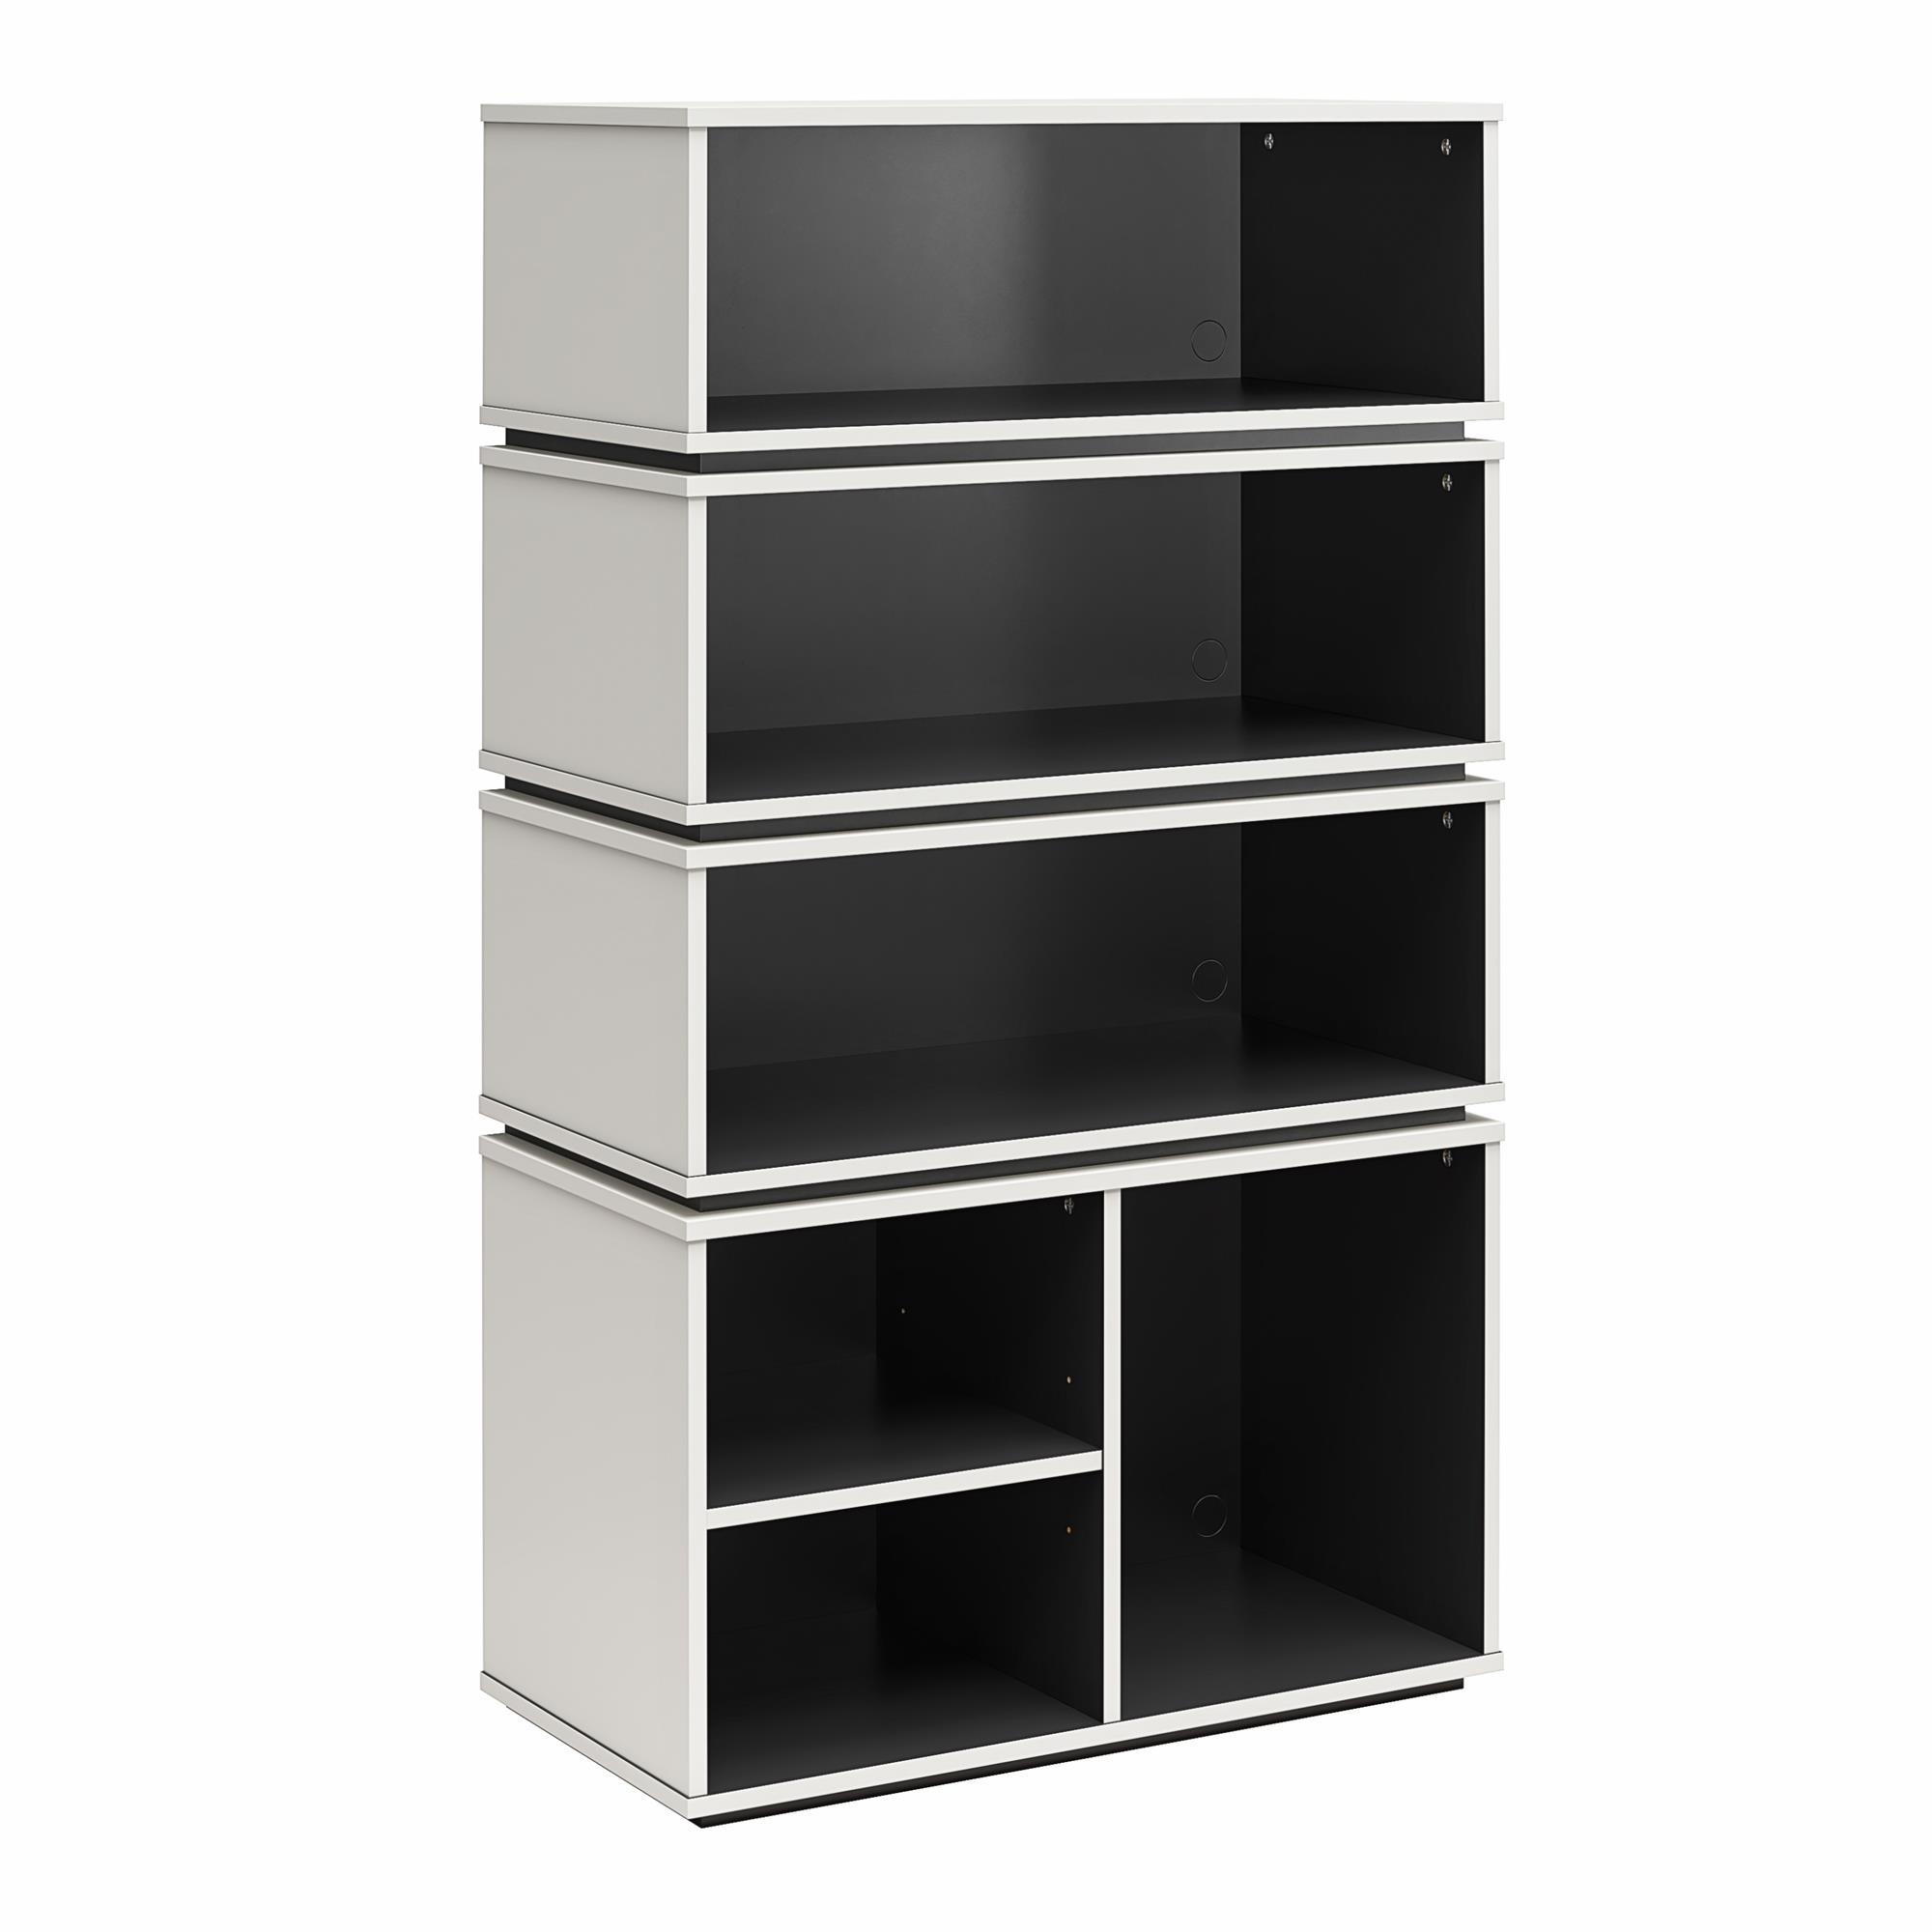 NTense Eclipse Gaming & Collectable Display Storage Bookcase, White and Charcoal - image 3 of 15